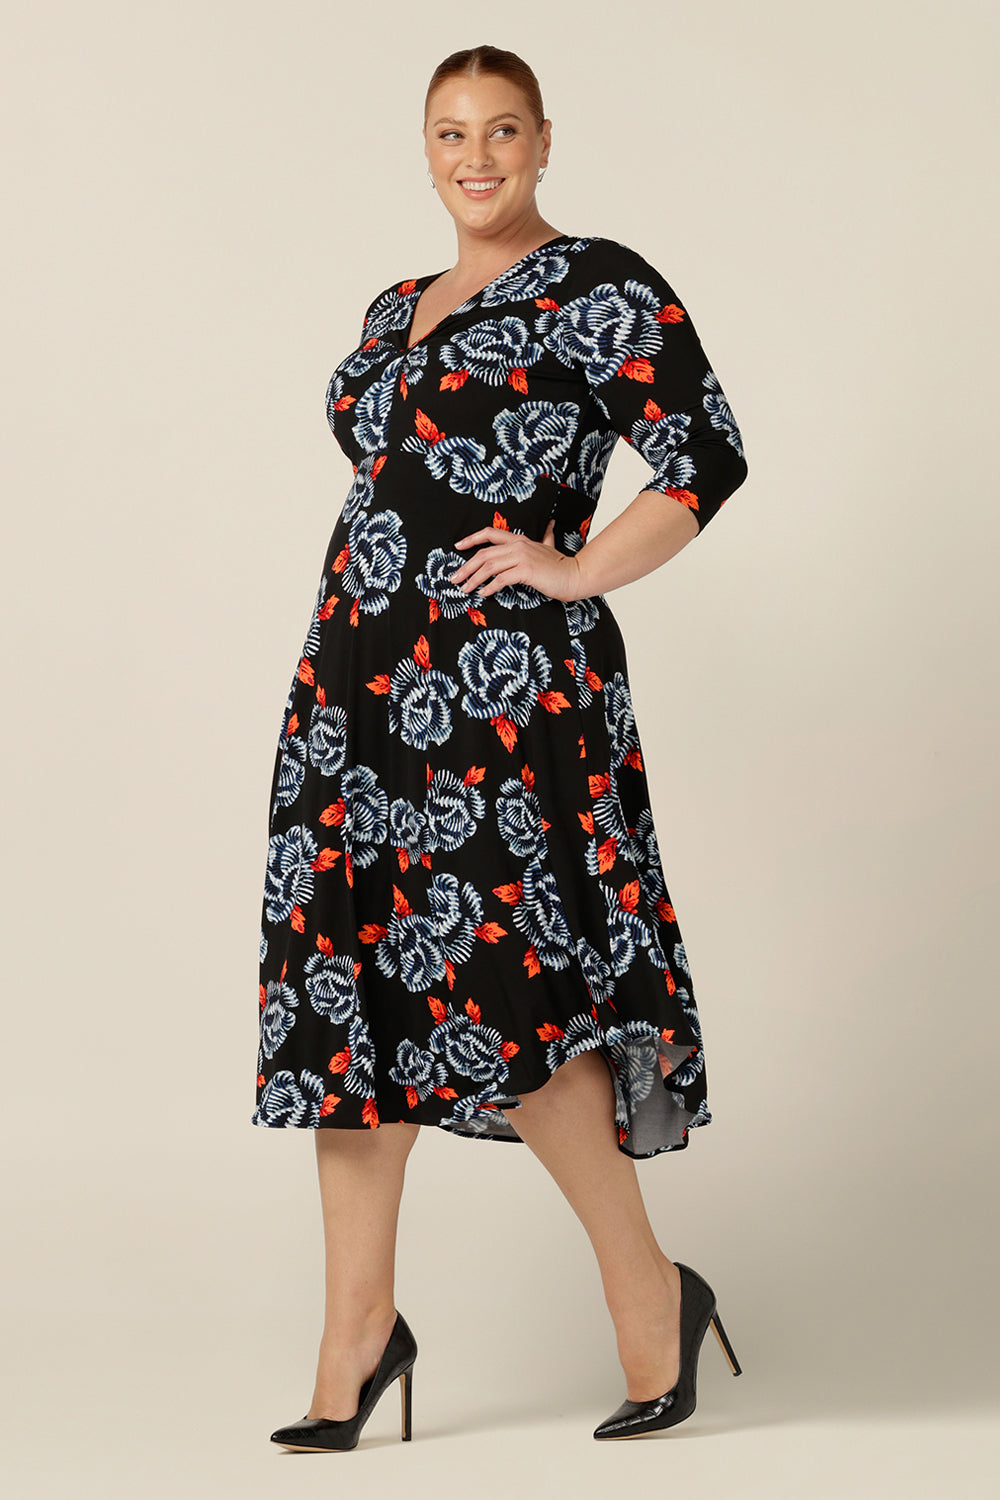 A size 18 plus size woman wears a blue and orange floral print jersey dress by Australian and New Zealand women's clothing brand, L&F. this empire line dress features a V-neckline with twist detail, 3/4 sleeves and a full below-the-knee-length skirt. Australian-made, shop L&F work dresses in sizes 8 to size 24.